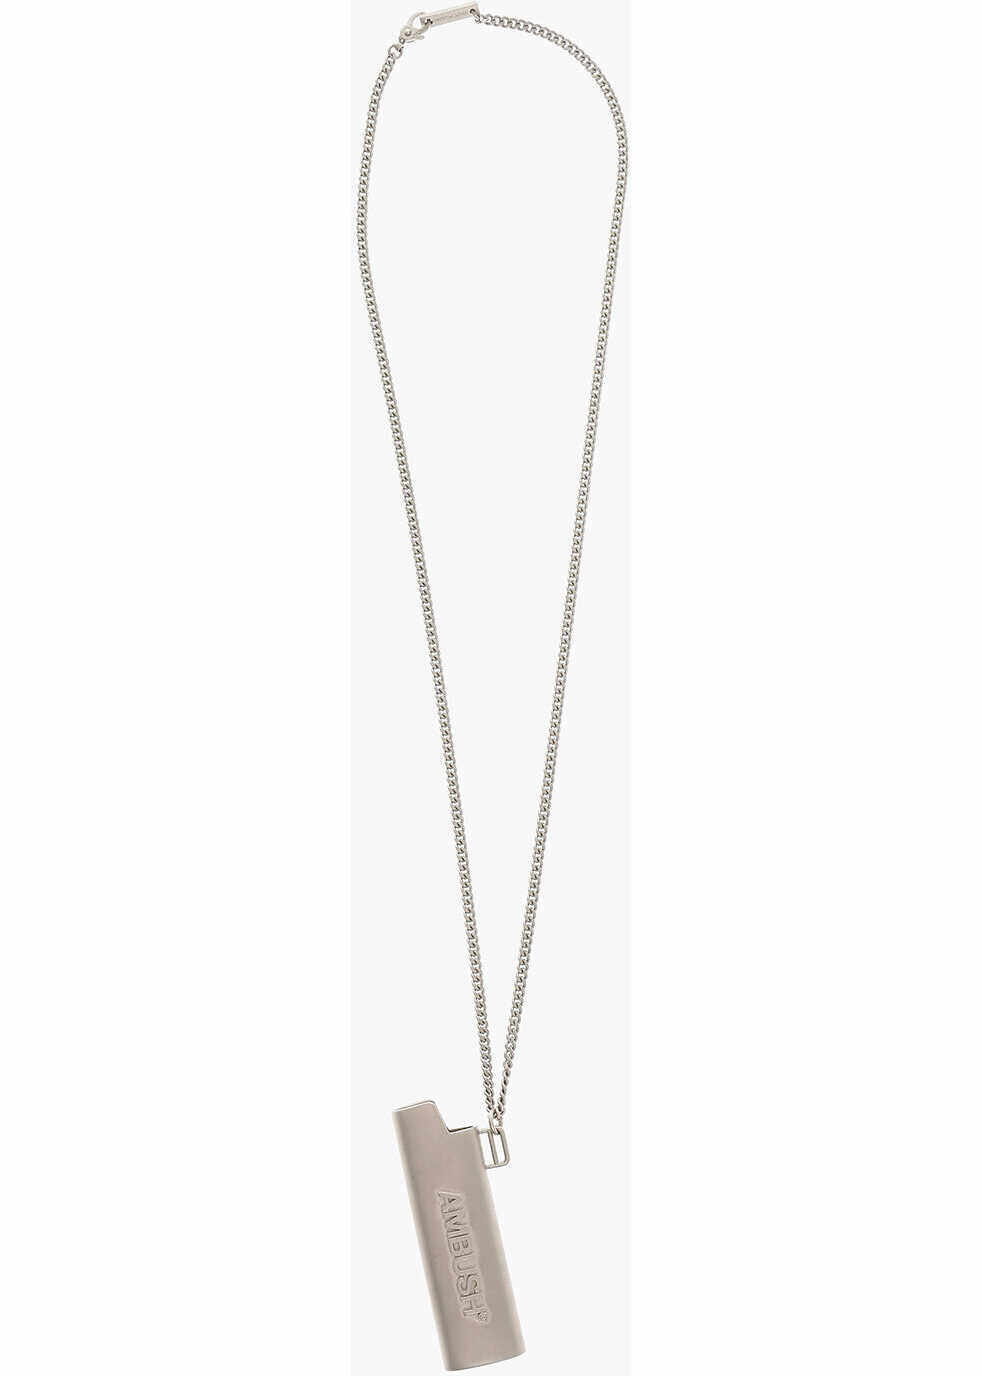 AMBUSH Silver Tone Necklace With Pendant In The Shape Of A Lighter Silver